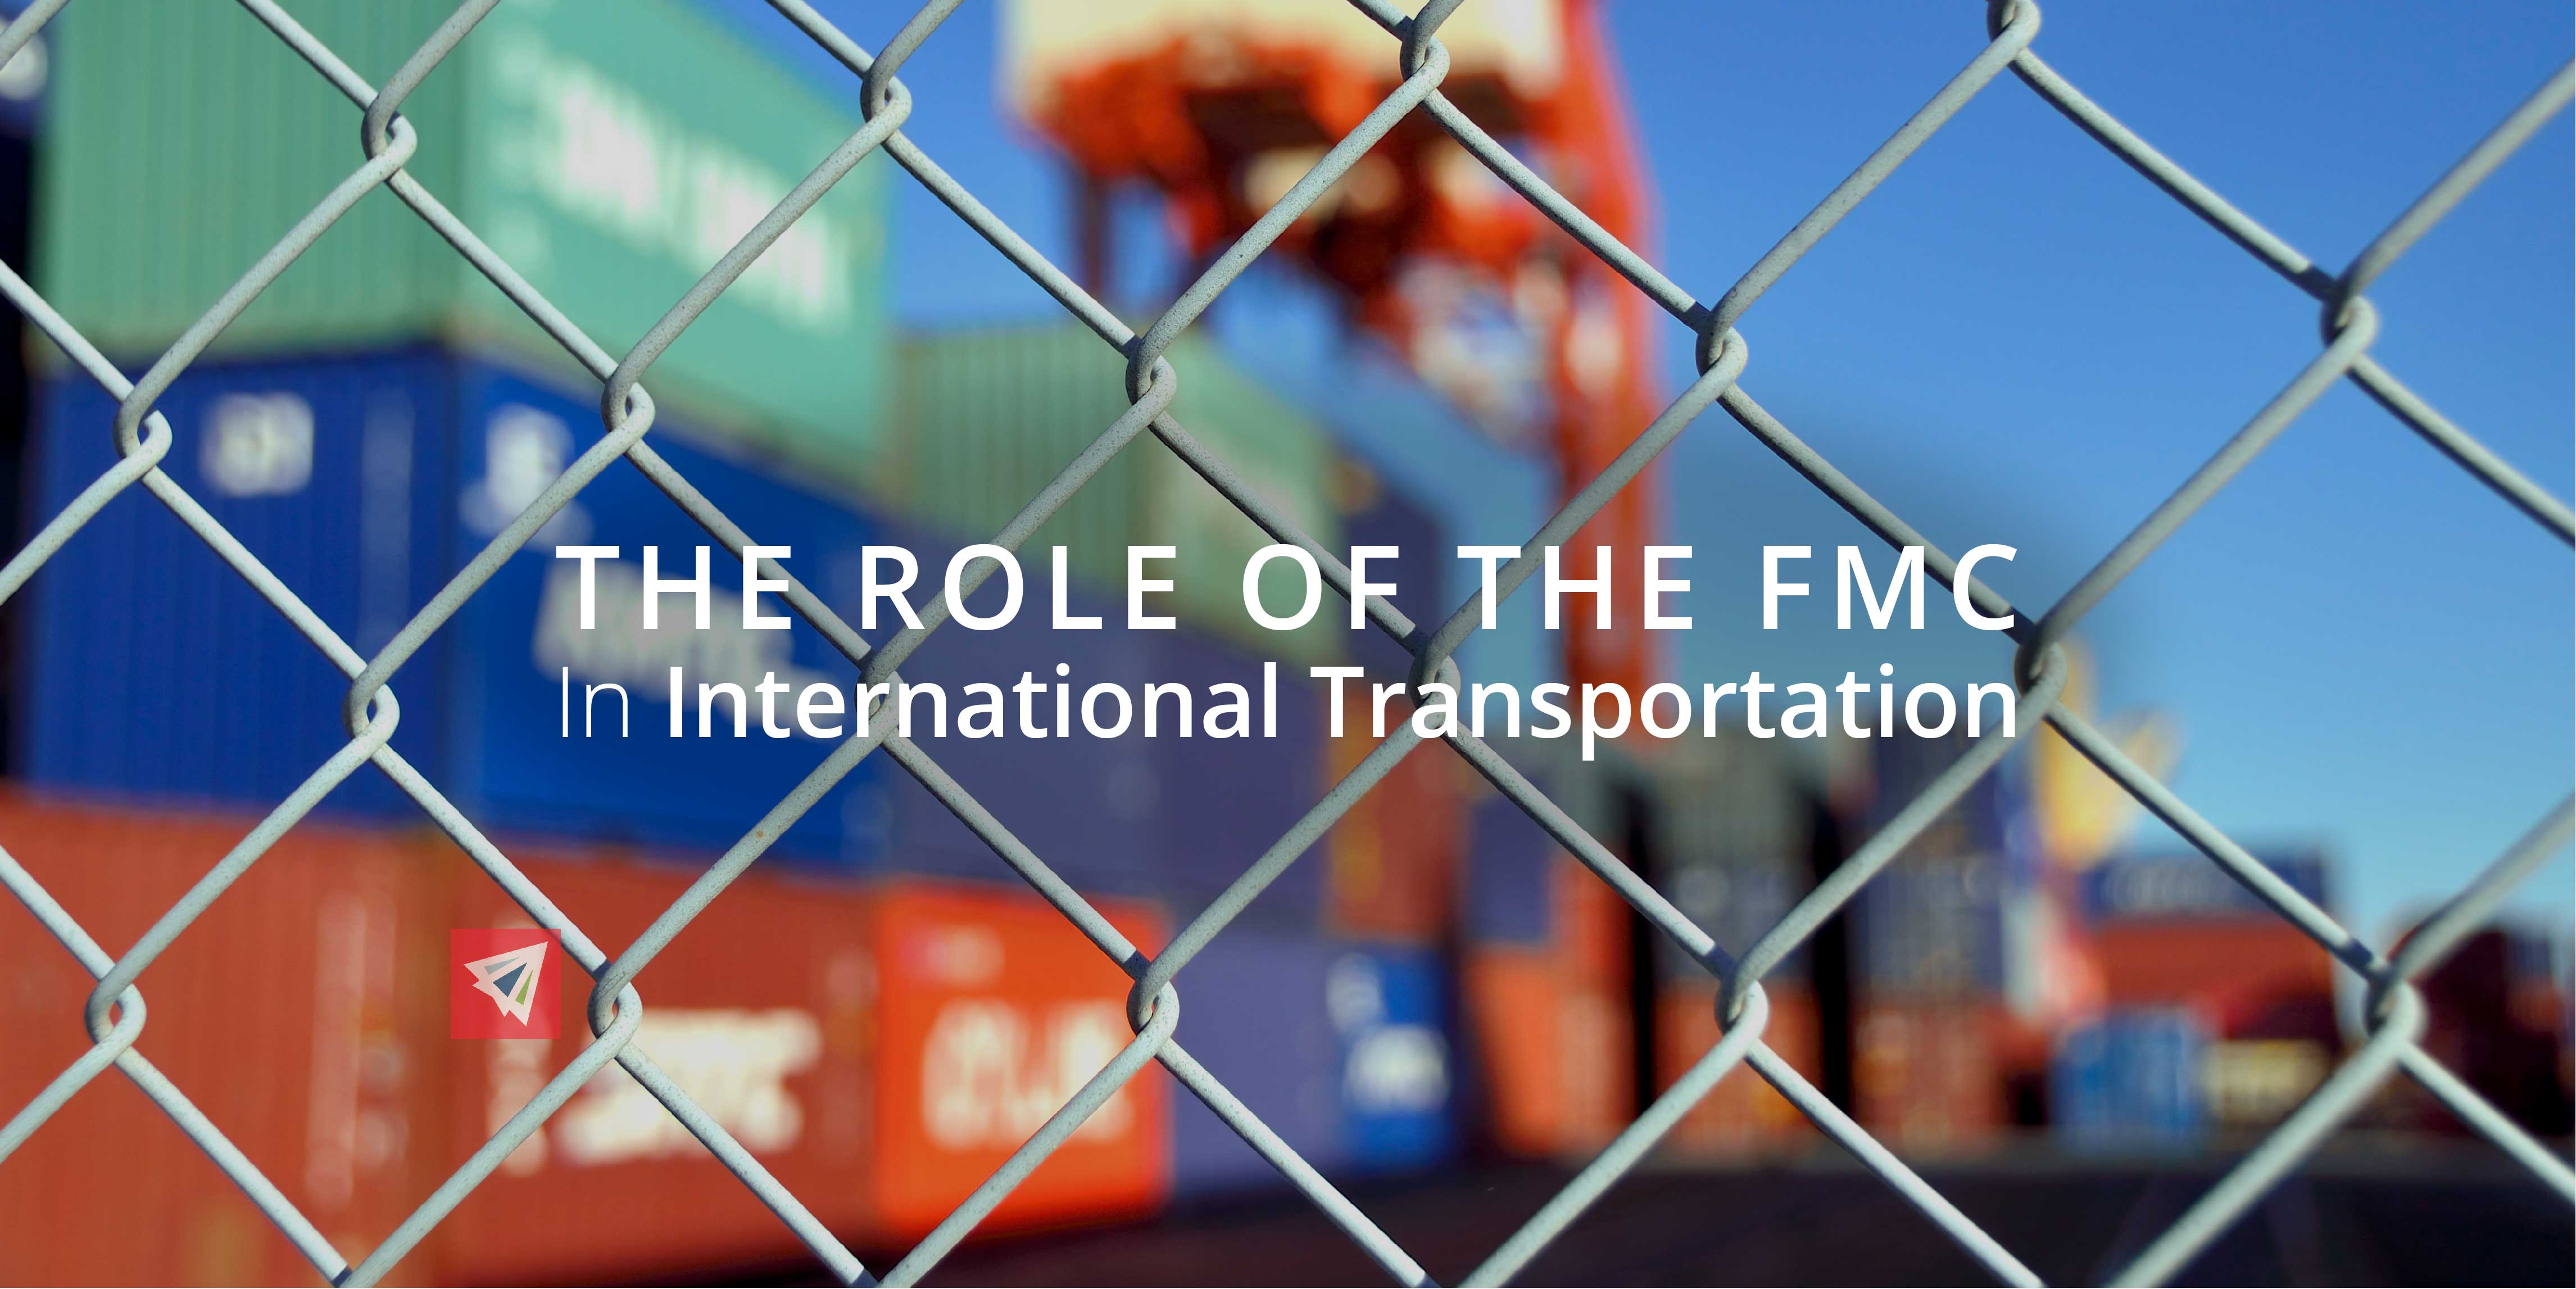 The Role of the FMC in International Transportation